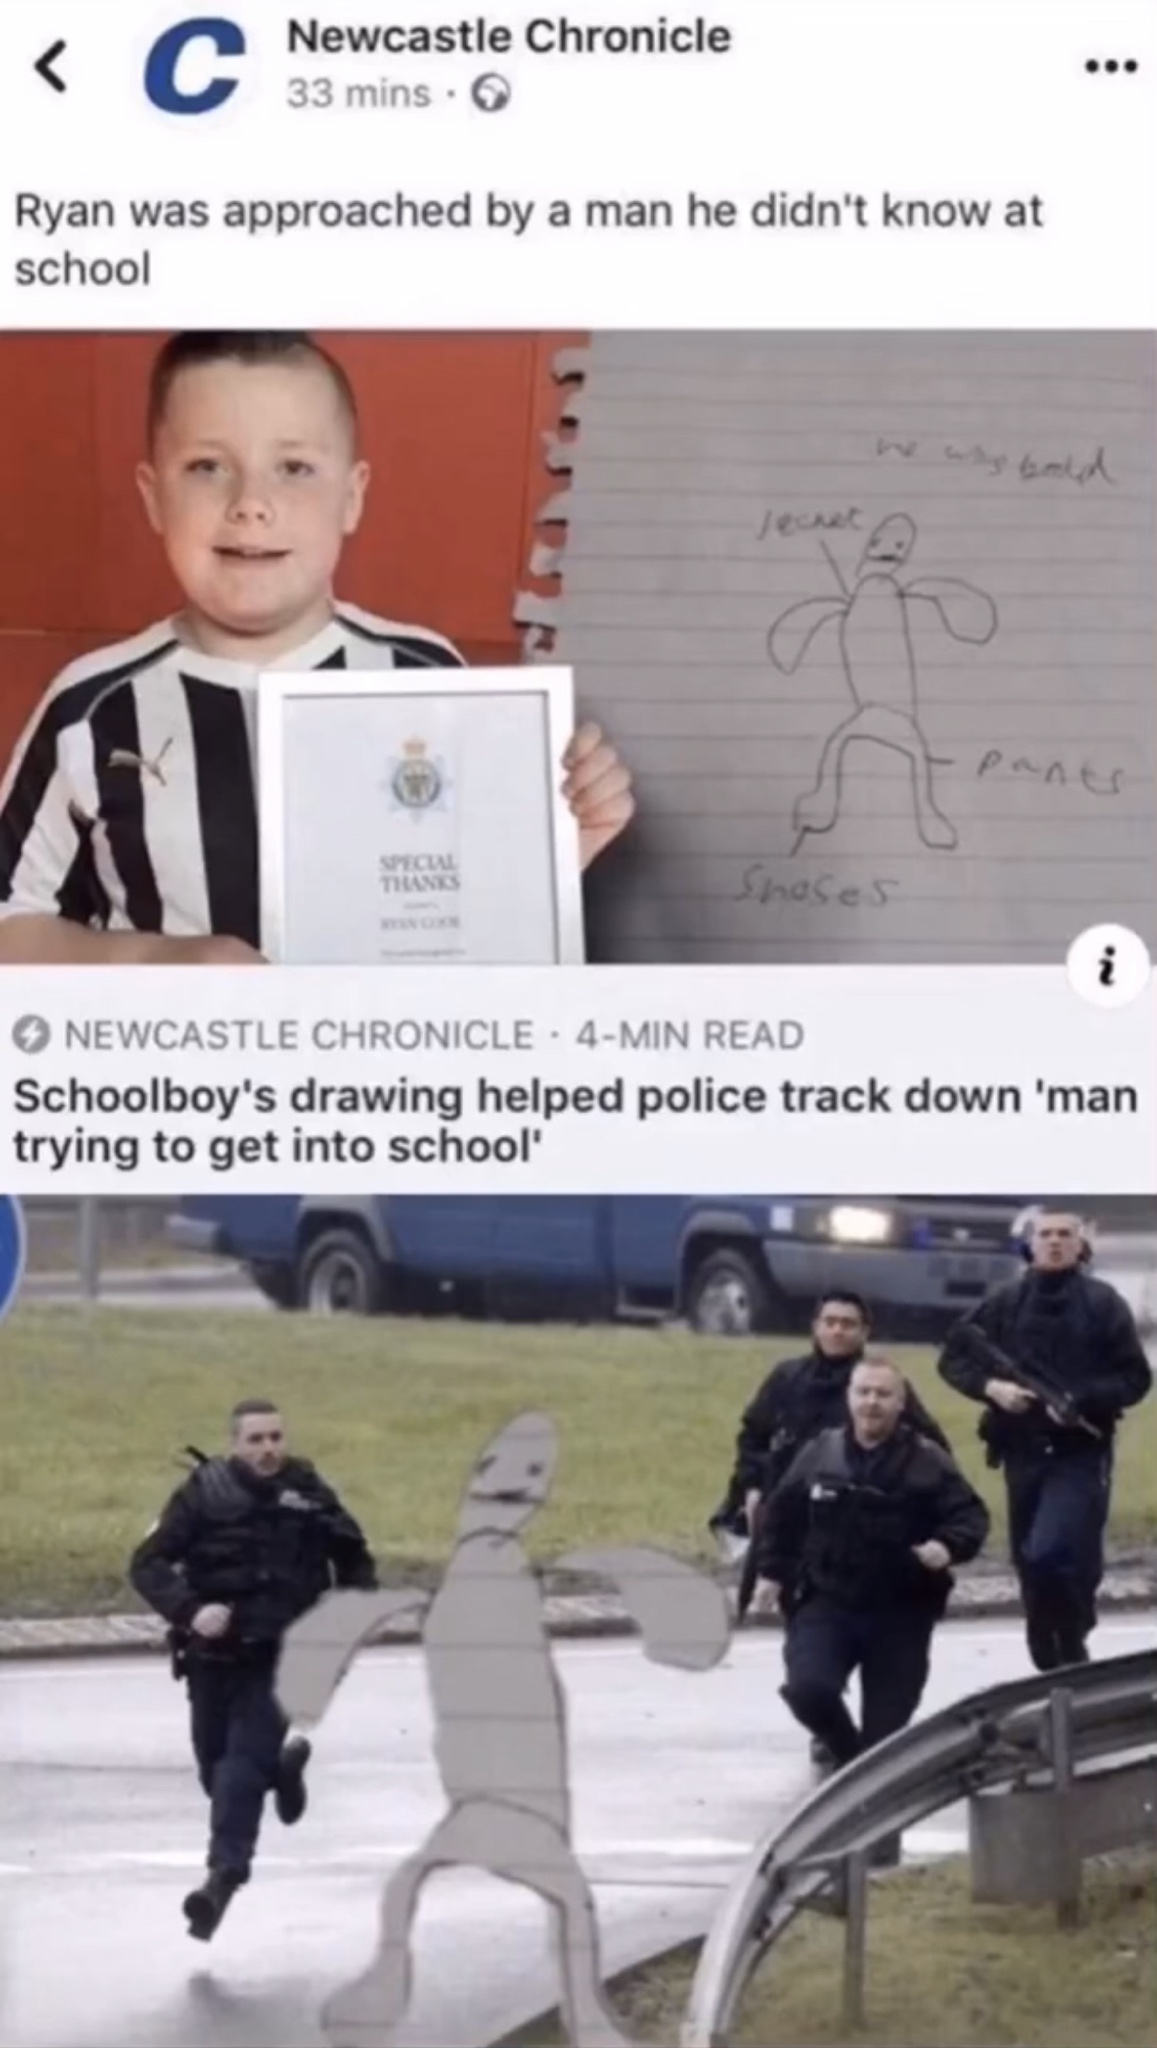 schoolboy's drawing helped police track down - Newcastle Chronicle 33 mins. Ryan was approached by a man he didn't know at school w was hold Spec Titanes Shases Newcastle Chronicle. 4Min Read Schoolboy's drawing helped police track down 'man trying to get